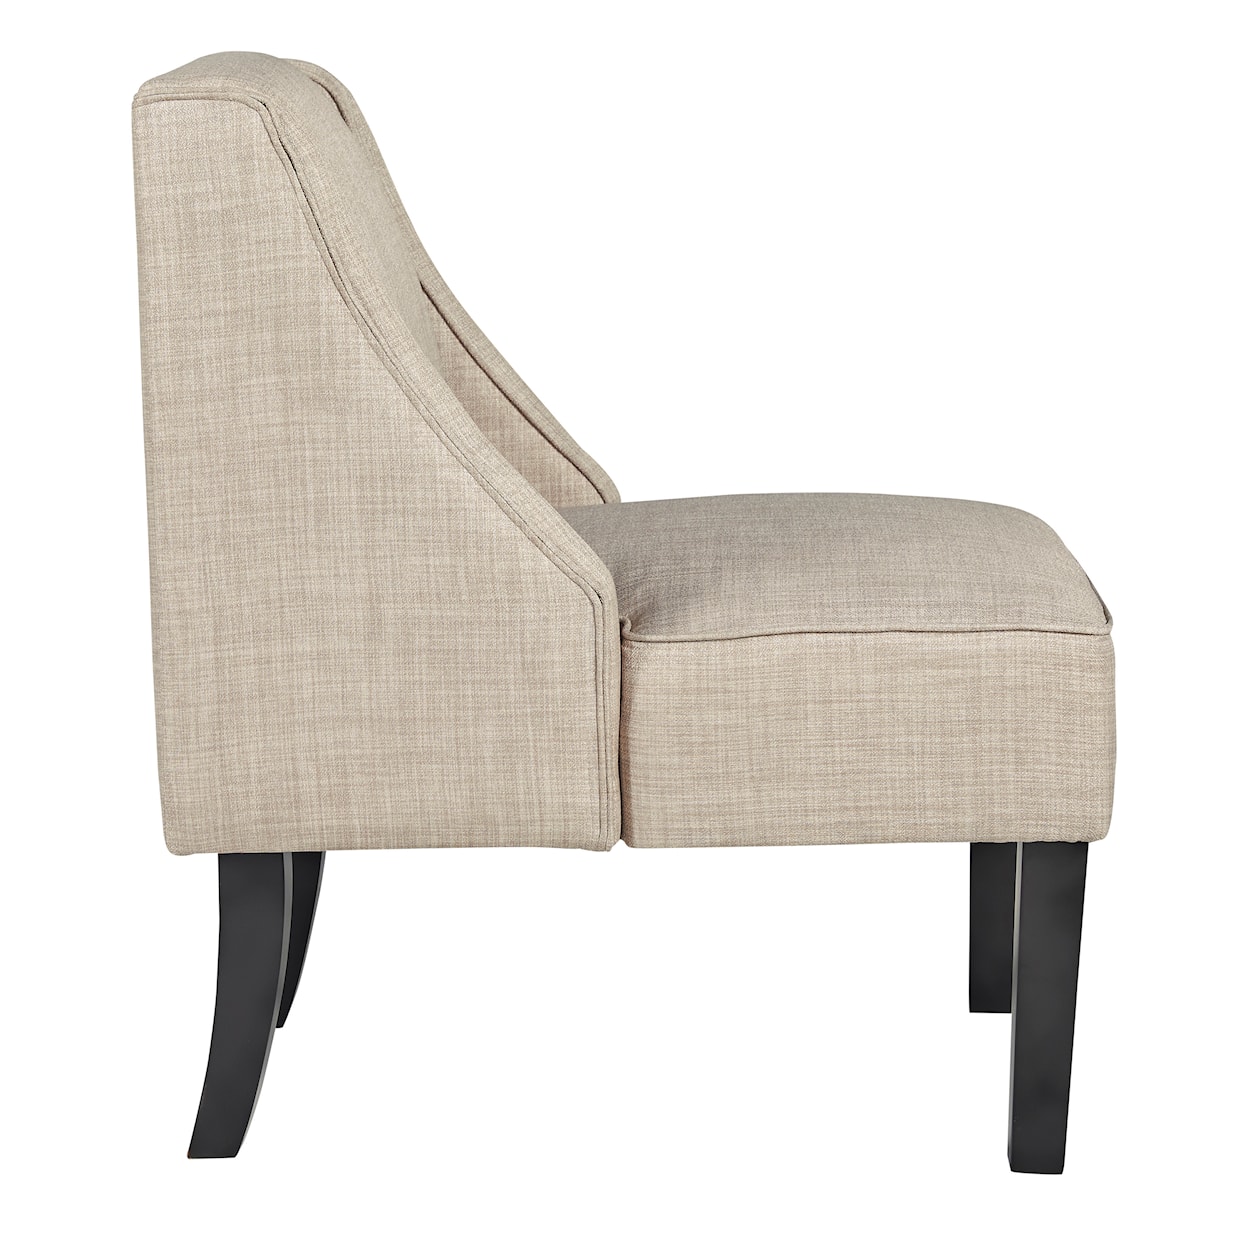 Signature Janesley Accent Chair